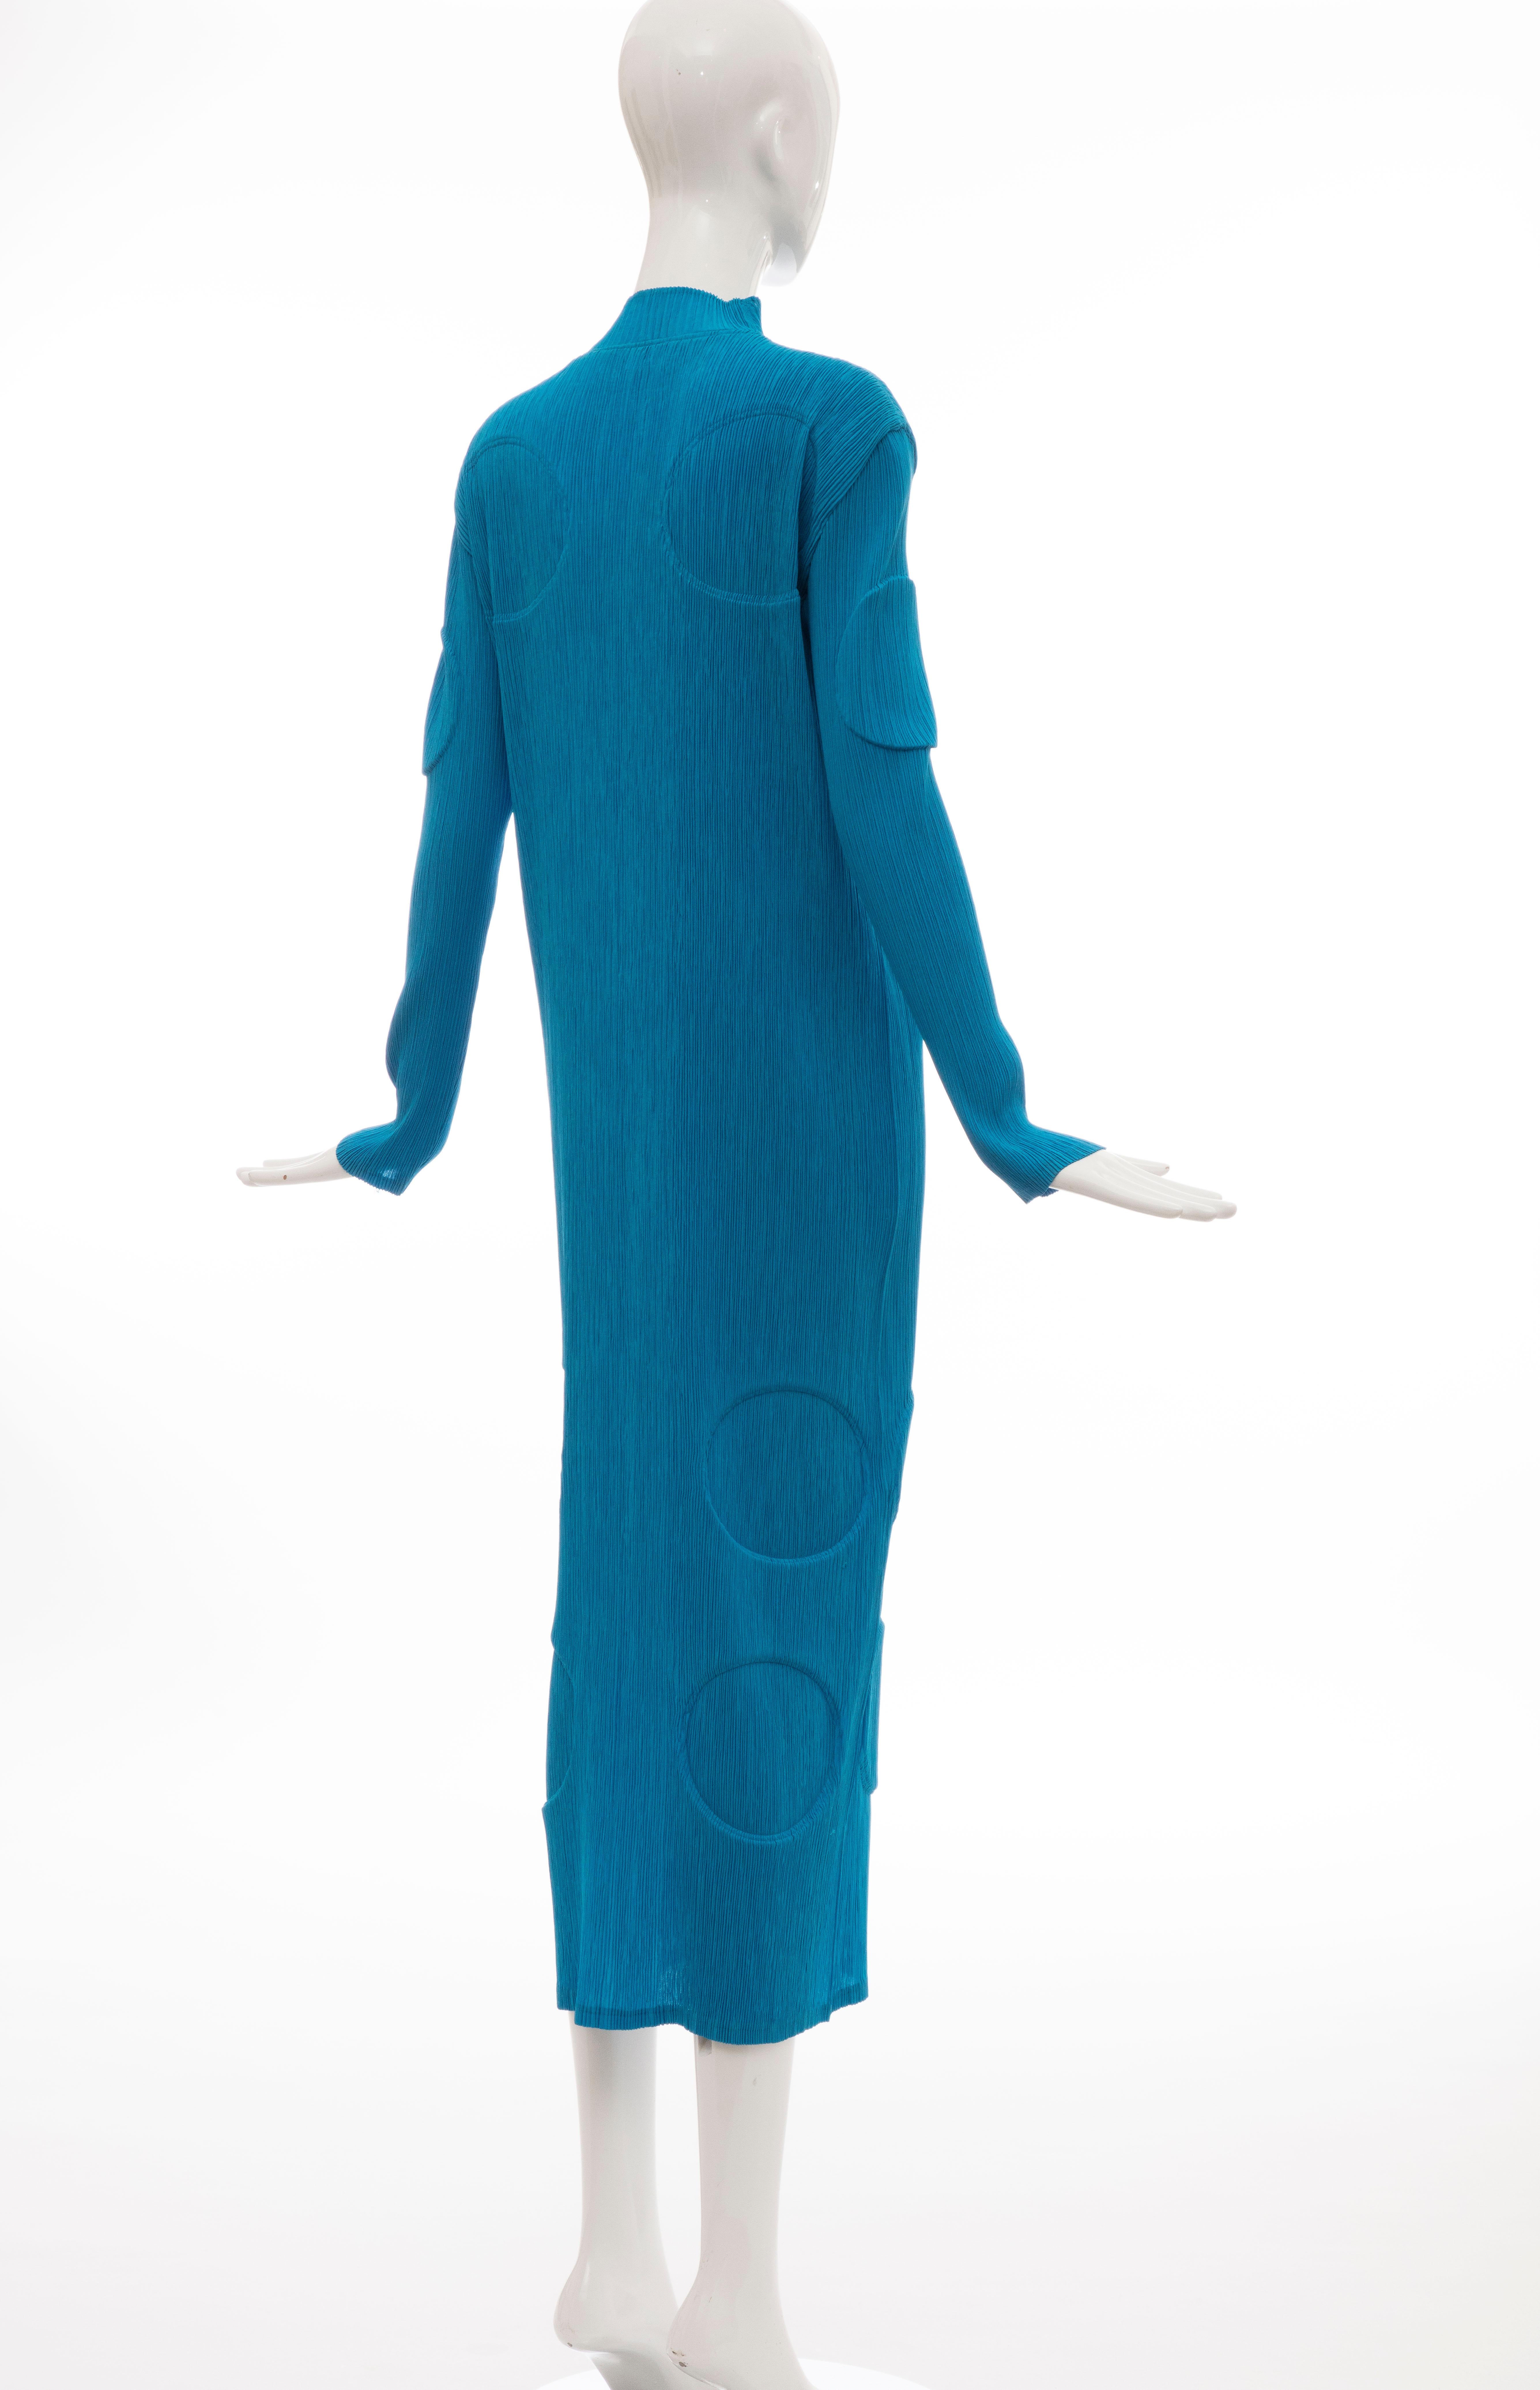 Issey Miyake Turquoise Long Button Front Cardigan, Circa 1990s For Sale 3